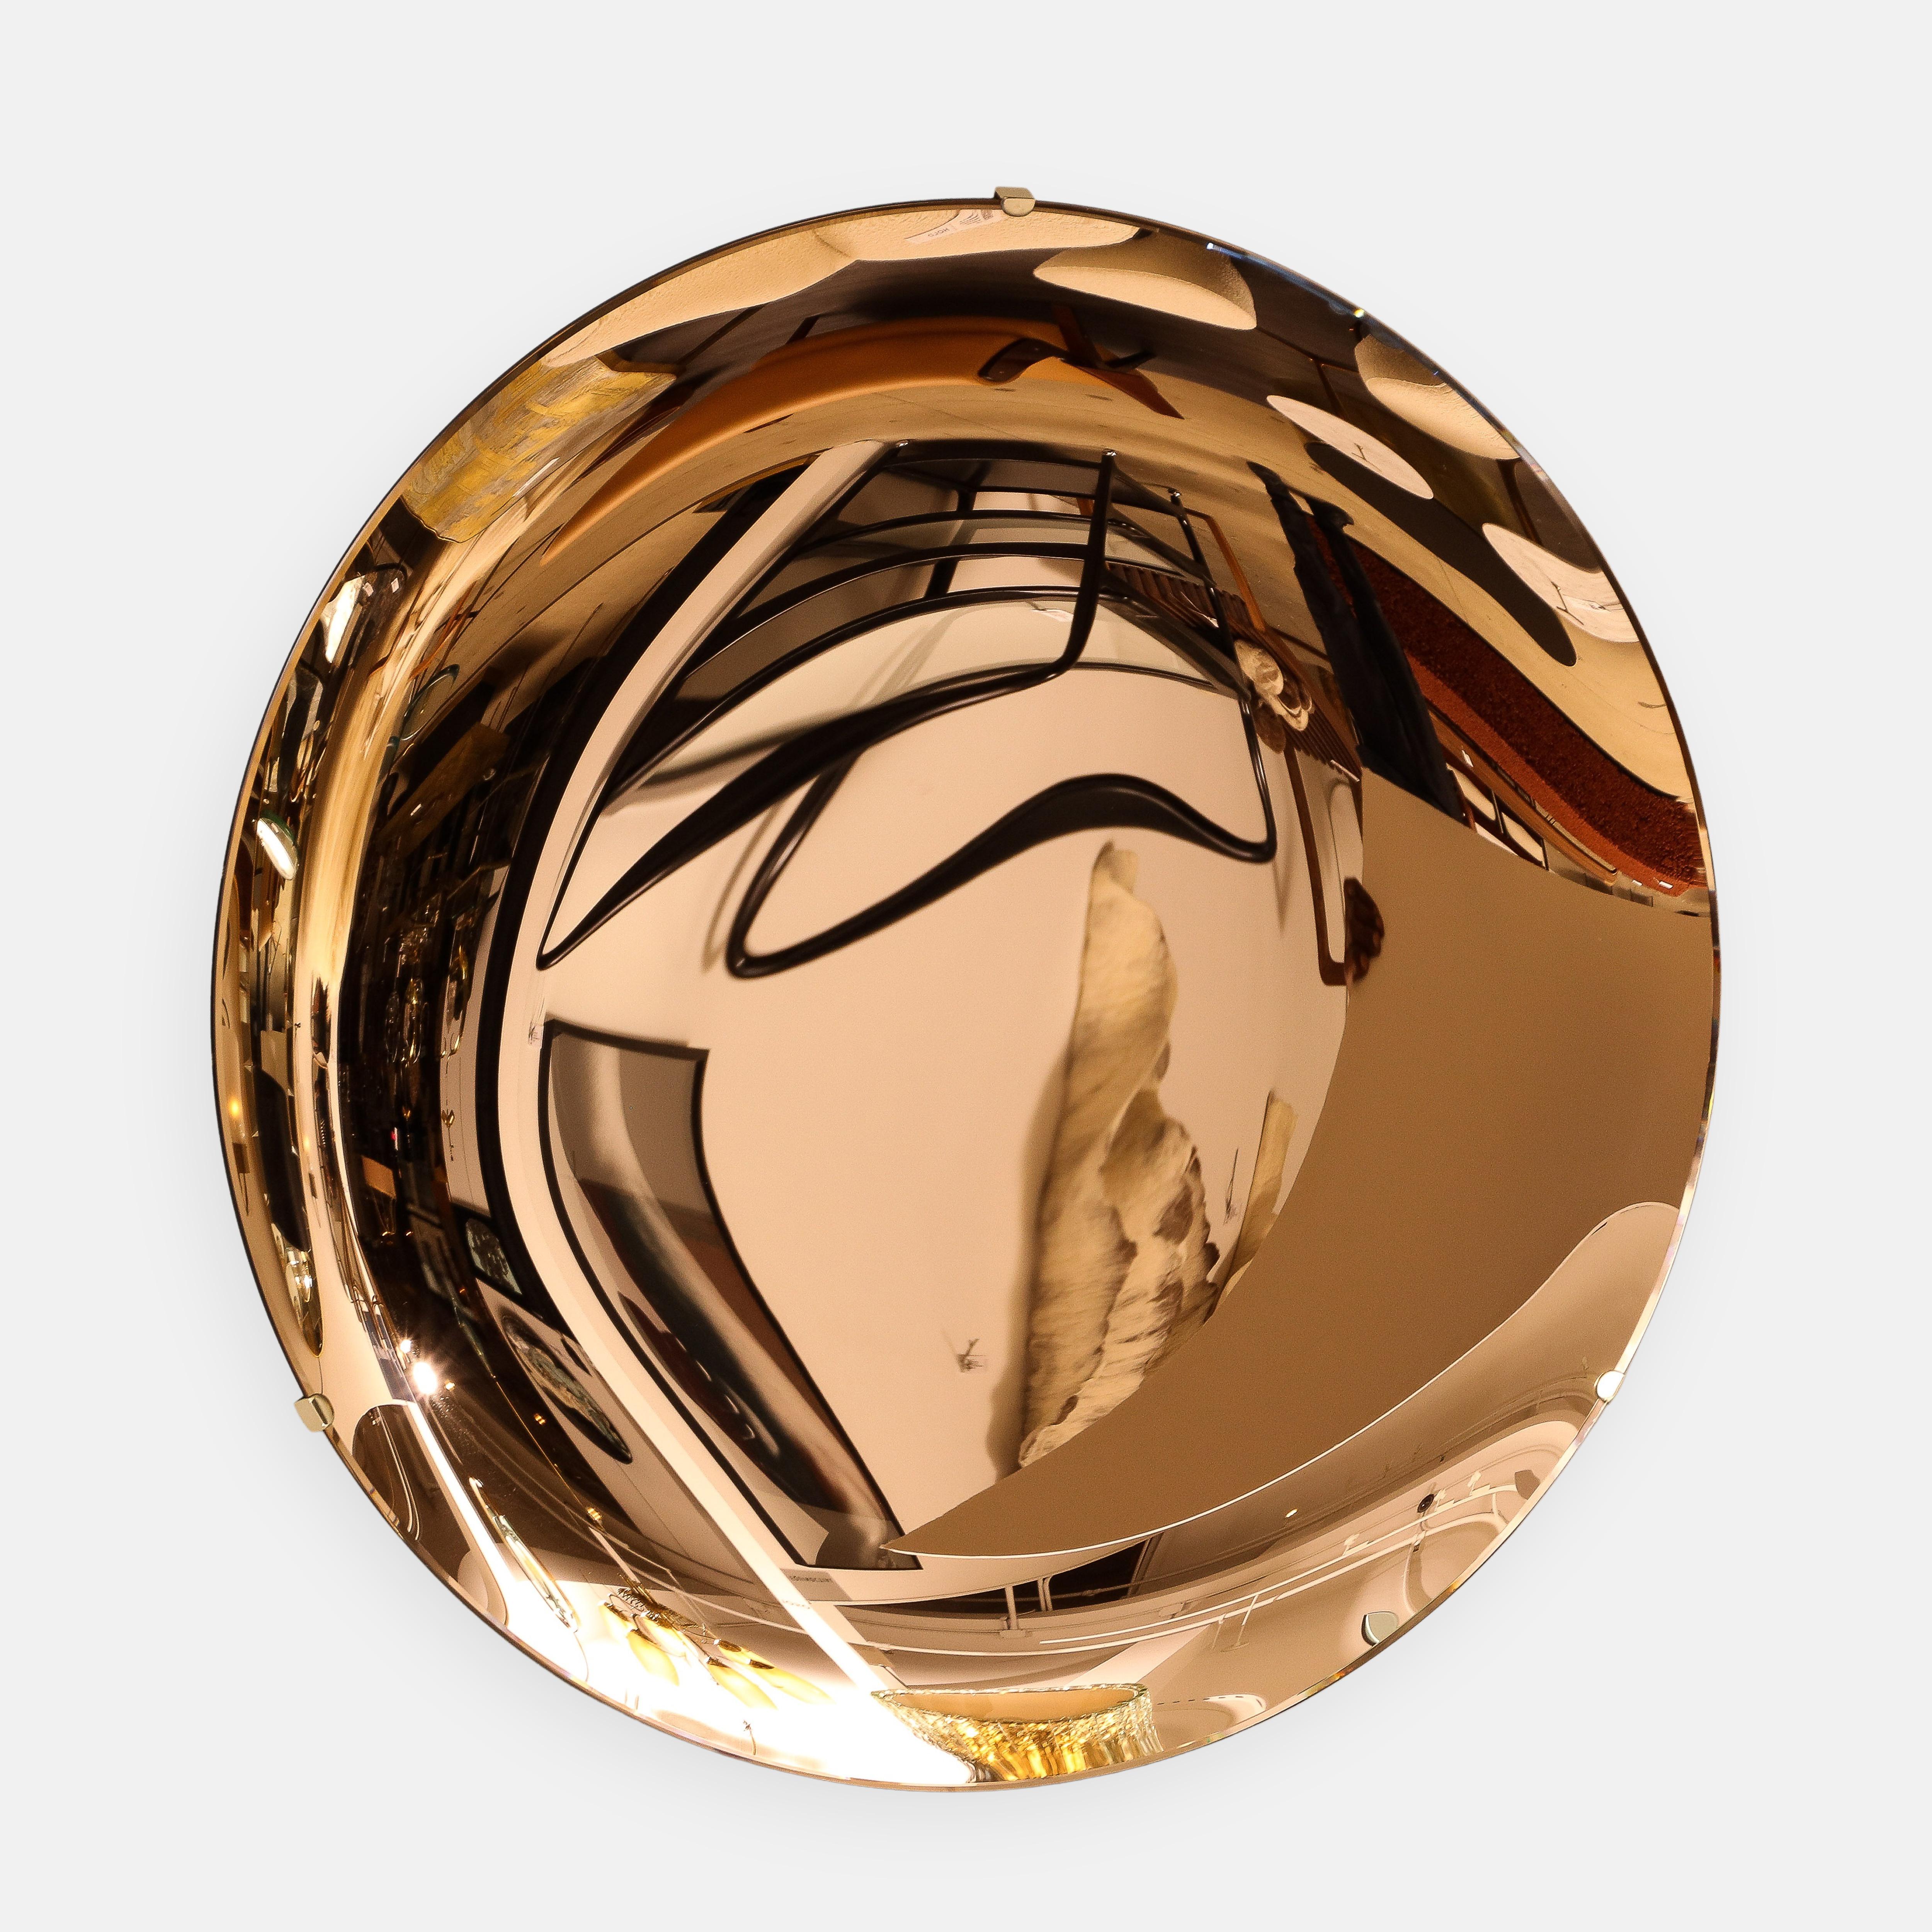 Effetto Vetro contemporary large round concave colored mirrored glass mounted on a polished brass structure on the back with three mounting clips on the front edges, Italy, 2023. This exquisite mirror is a sculptural work of art, grand and